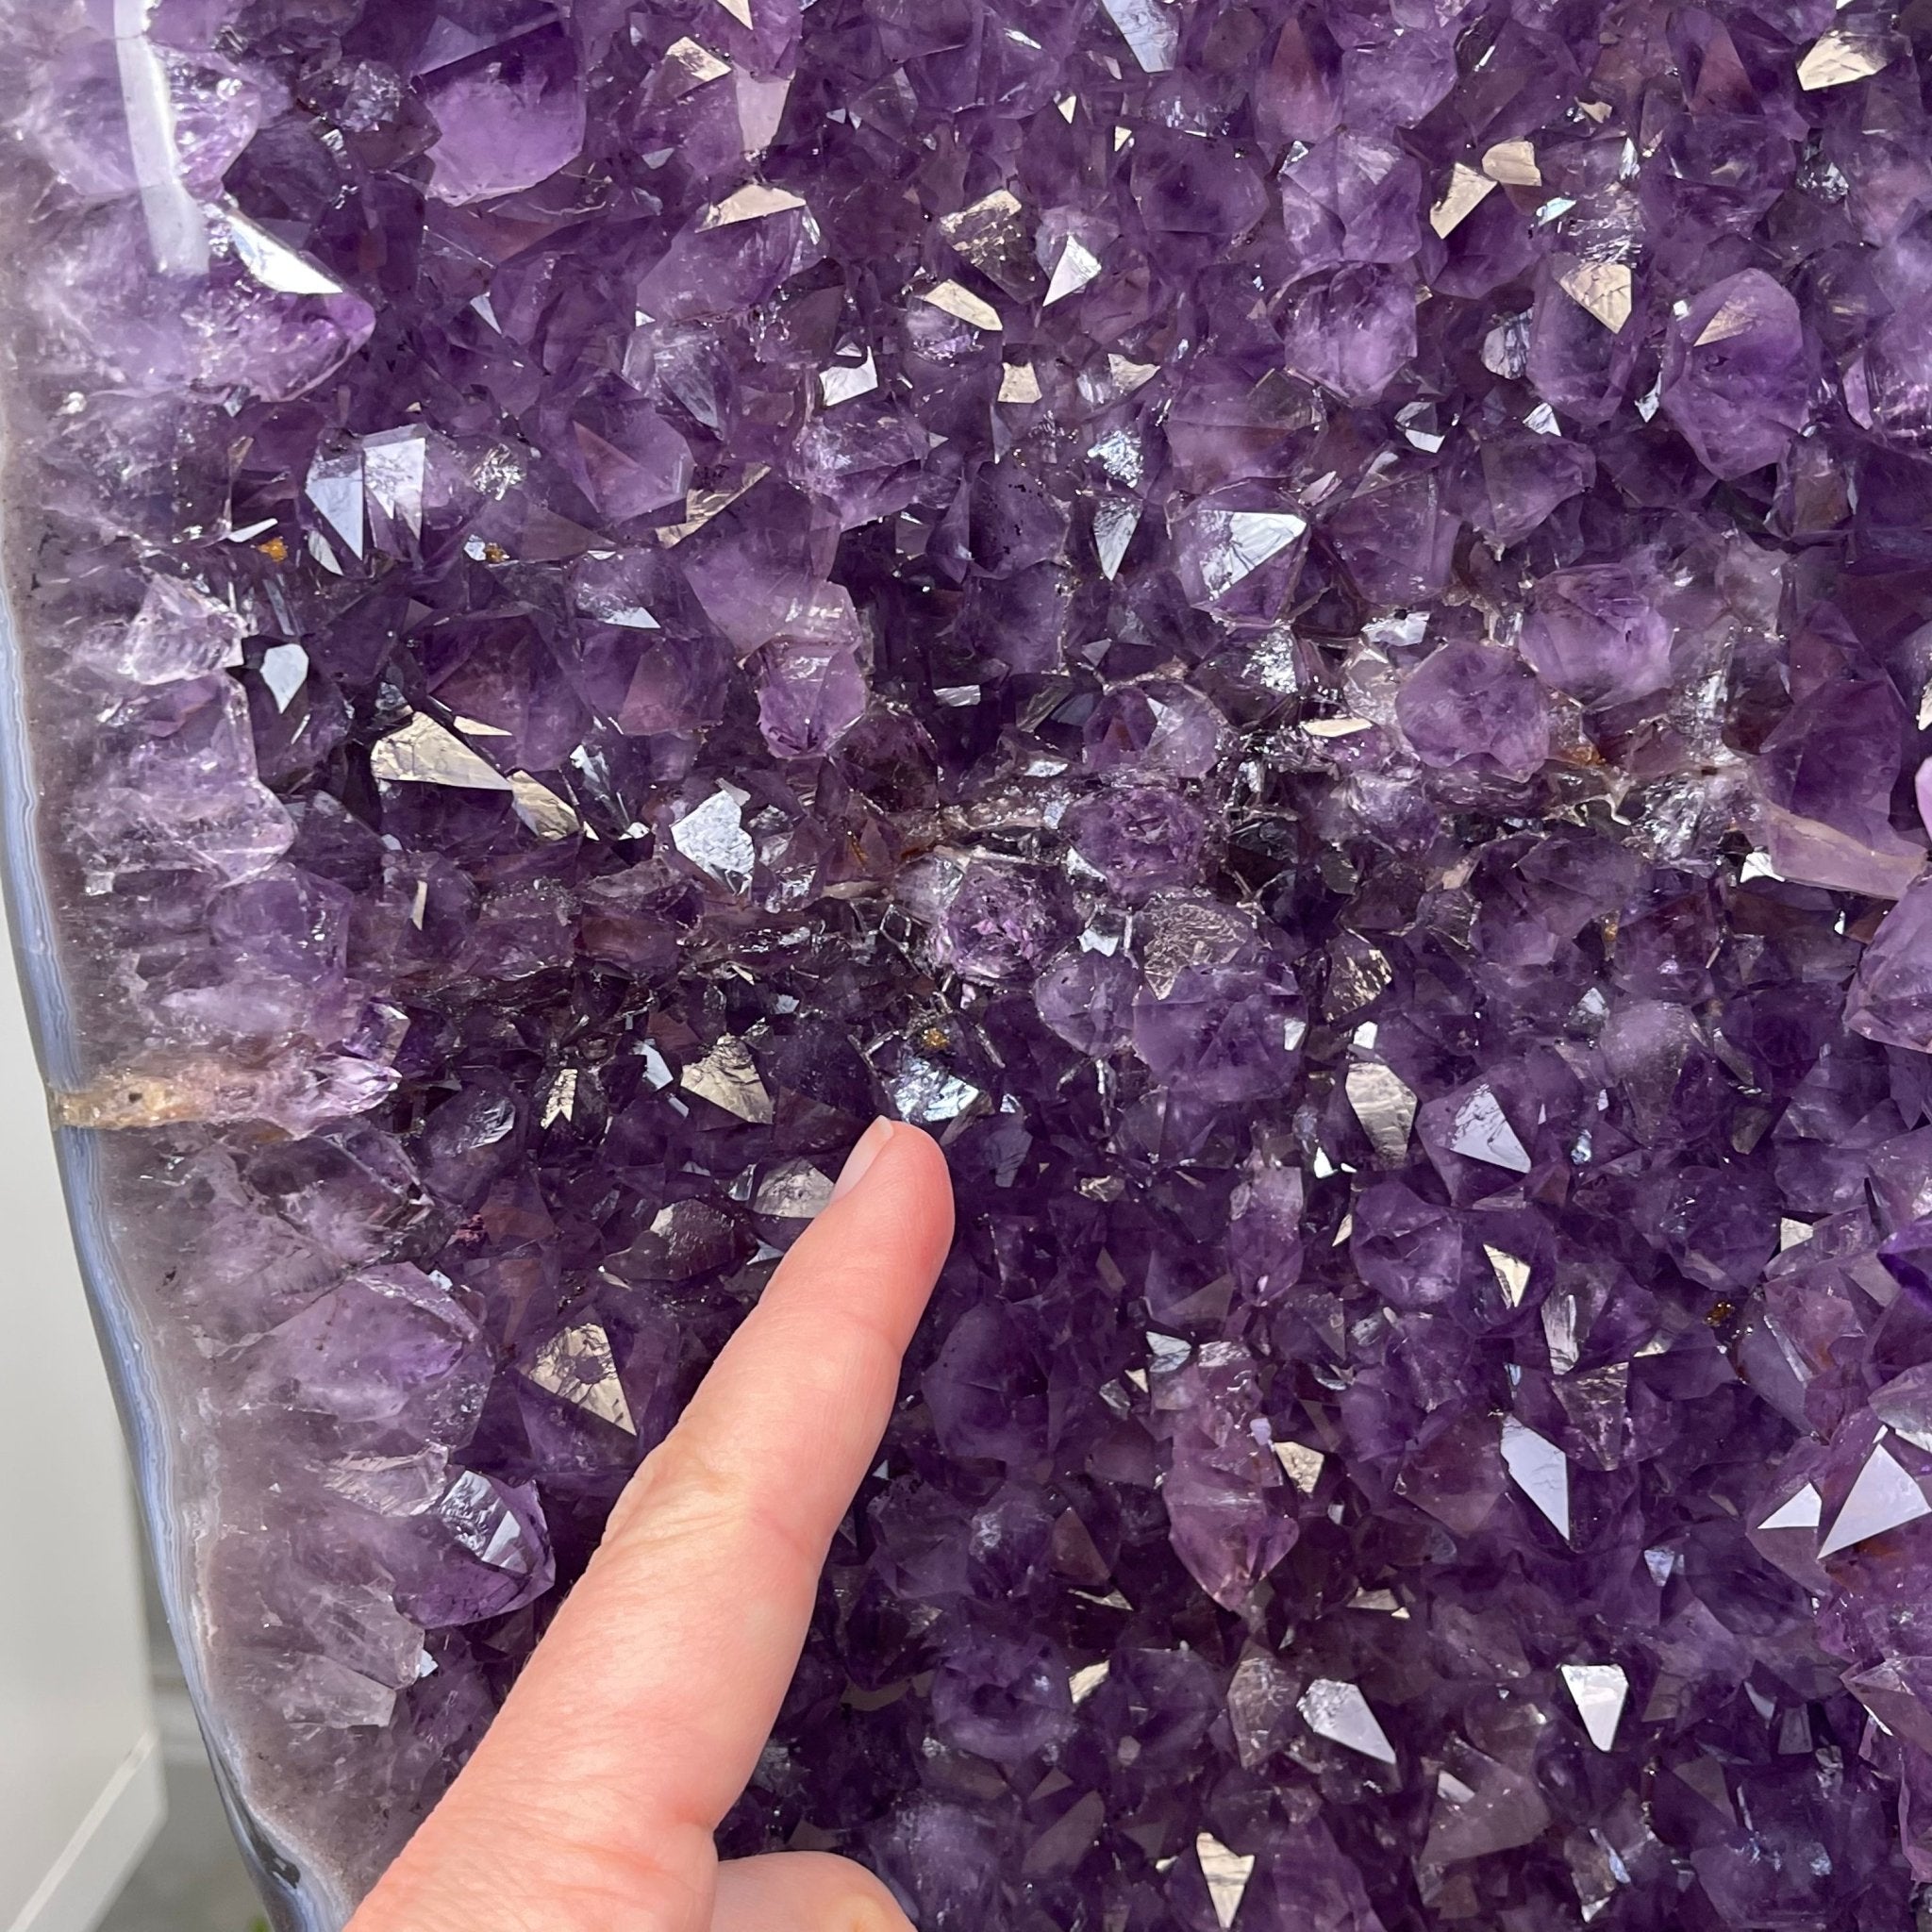 Large Standard Plus Quality Brazilian Amethyst Cathedral, 108 lbs & 55.8" Tall #5601-1202 by Brazil Gems - Brazil GemsBrazil GemsLarge Standard Plus Quality Brazilian Amethyst Cathedral, 108 lbs & 55.8" Tall #5601-1202 by Brazil GemsCathedrals5601-1202